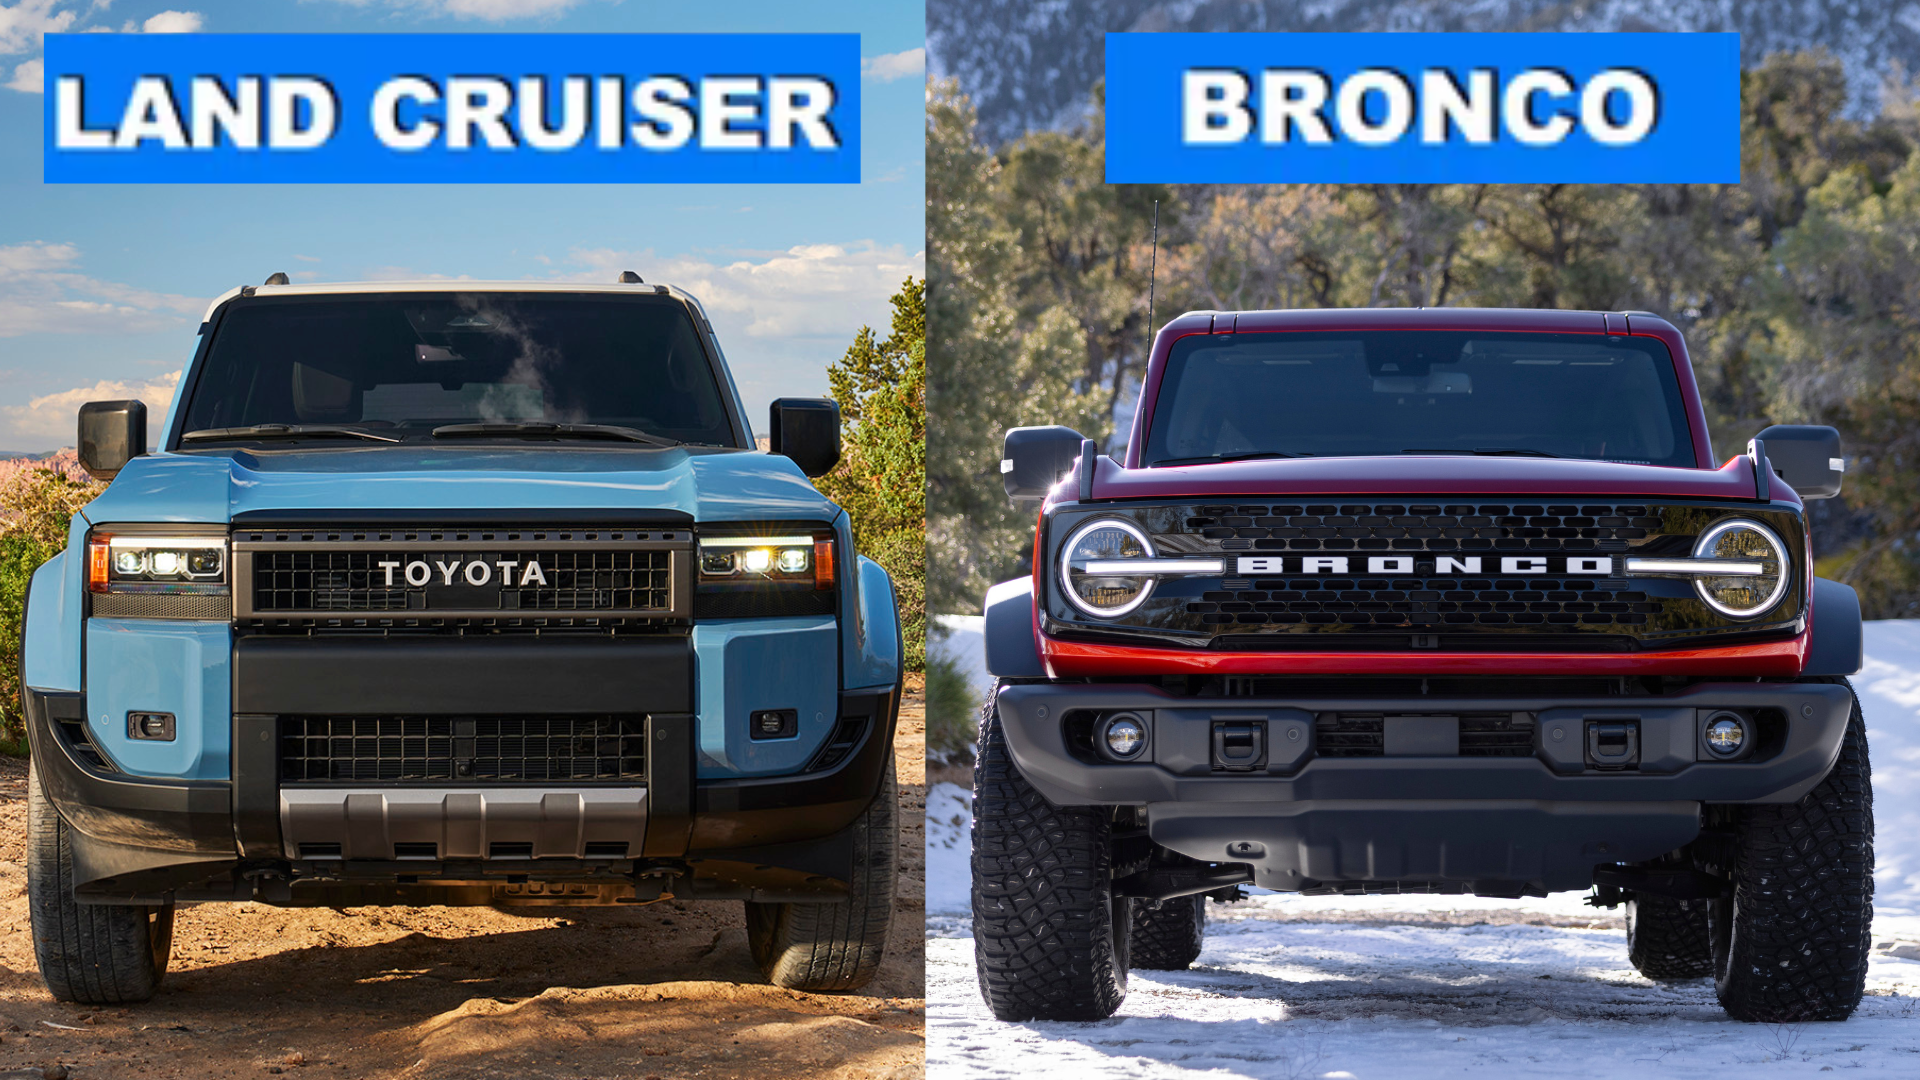 Ford Bronco and Toyota Land Cruiser side-by-side